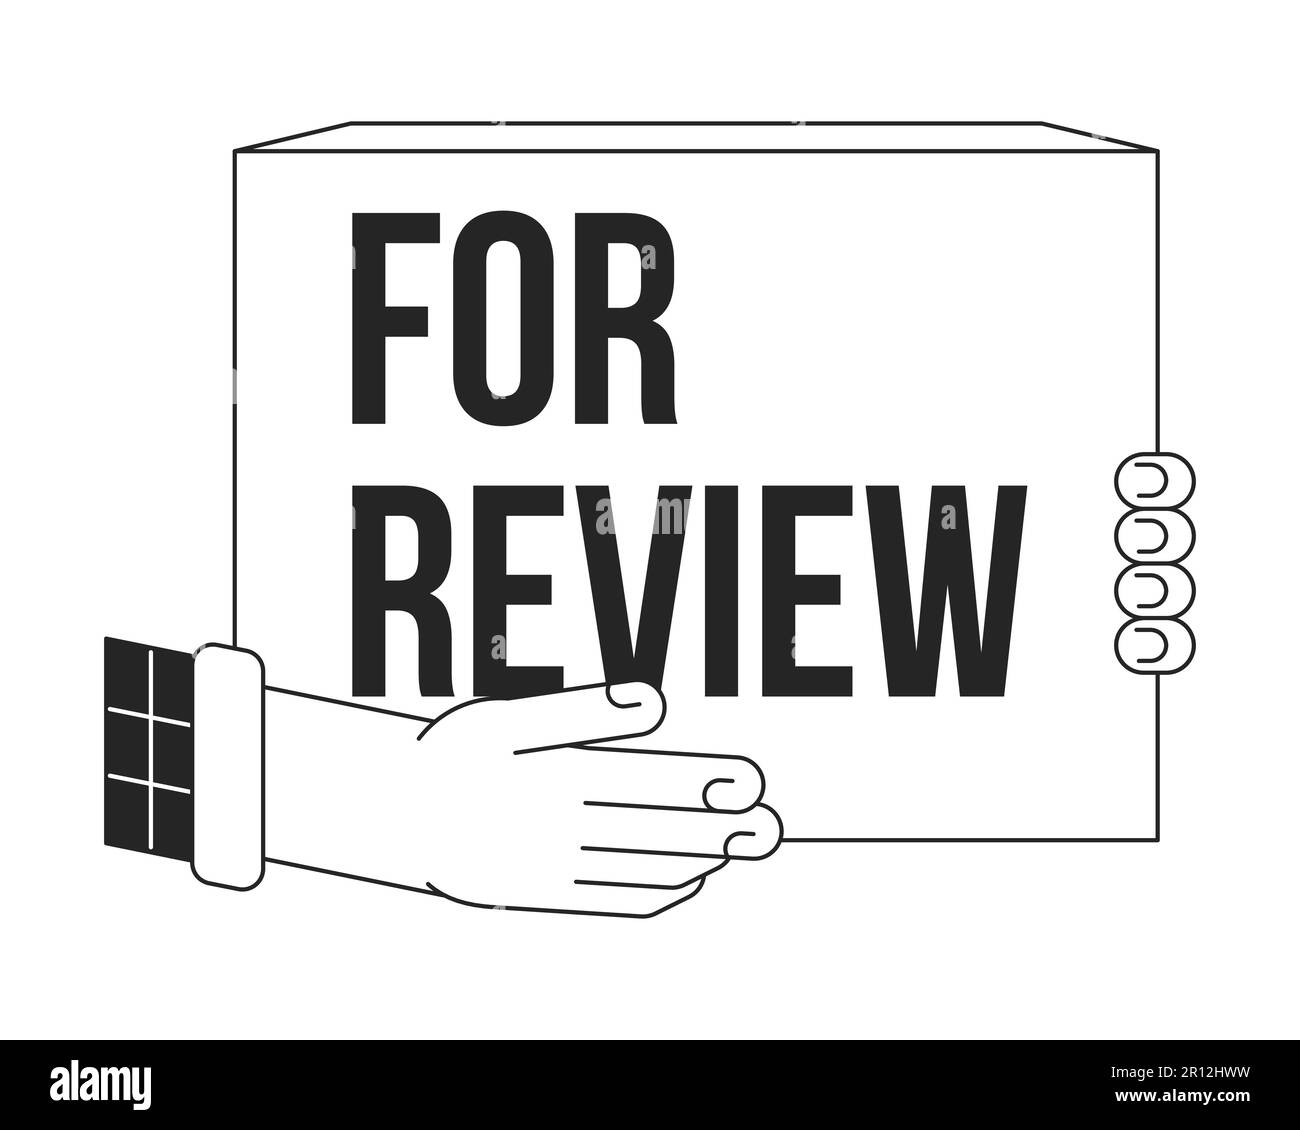 Review us bw concept vector spot illustration Stock Vector